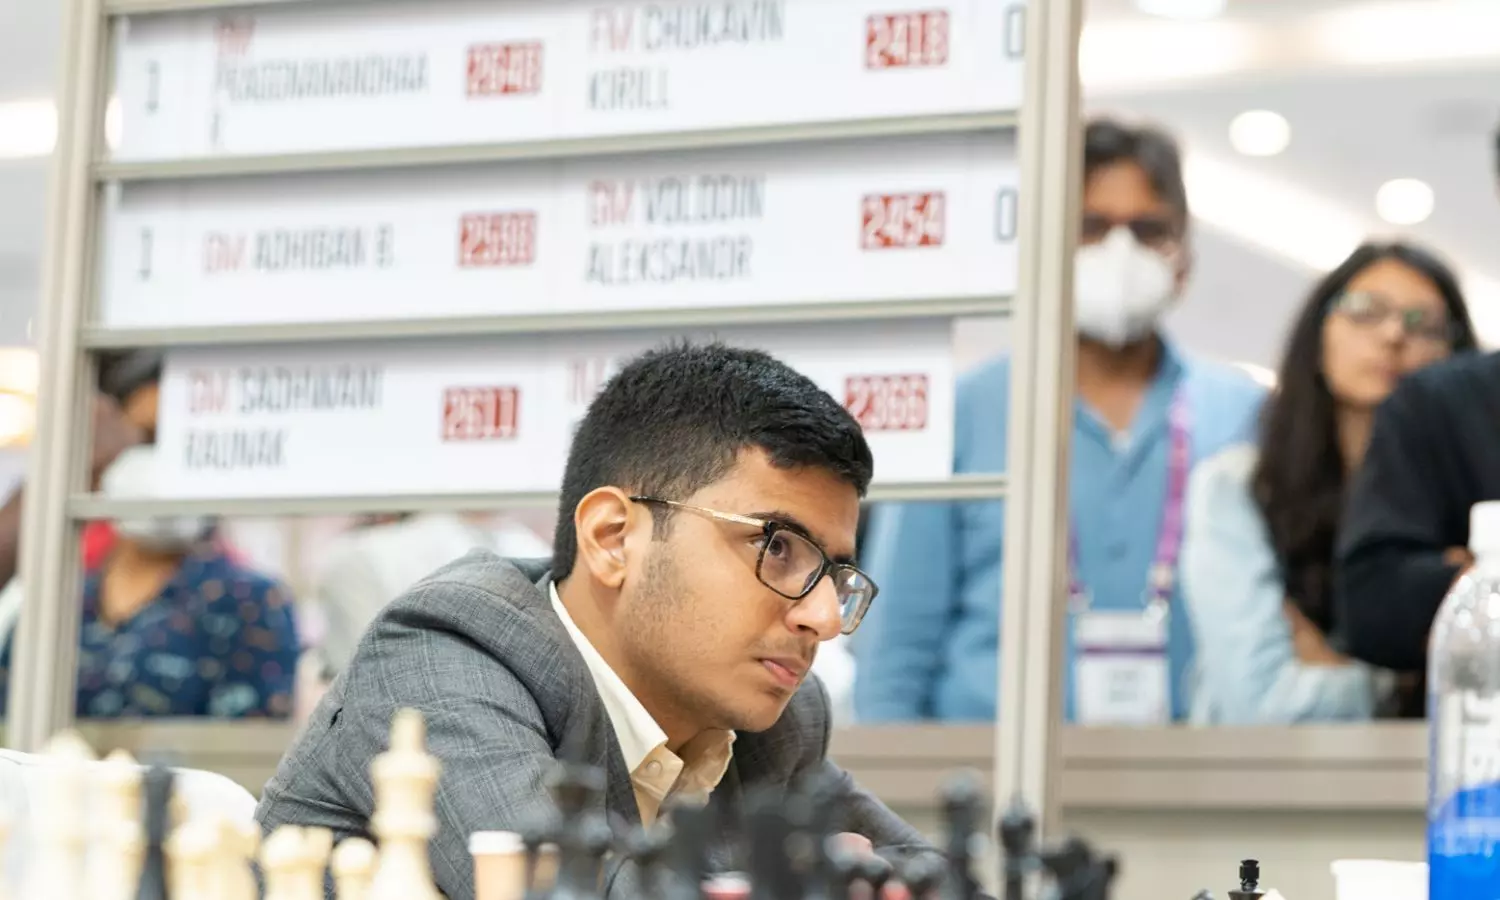 Who is Indian chess player Dommaraju Gukesh?